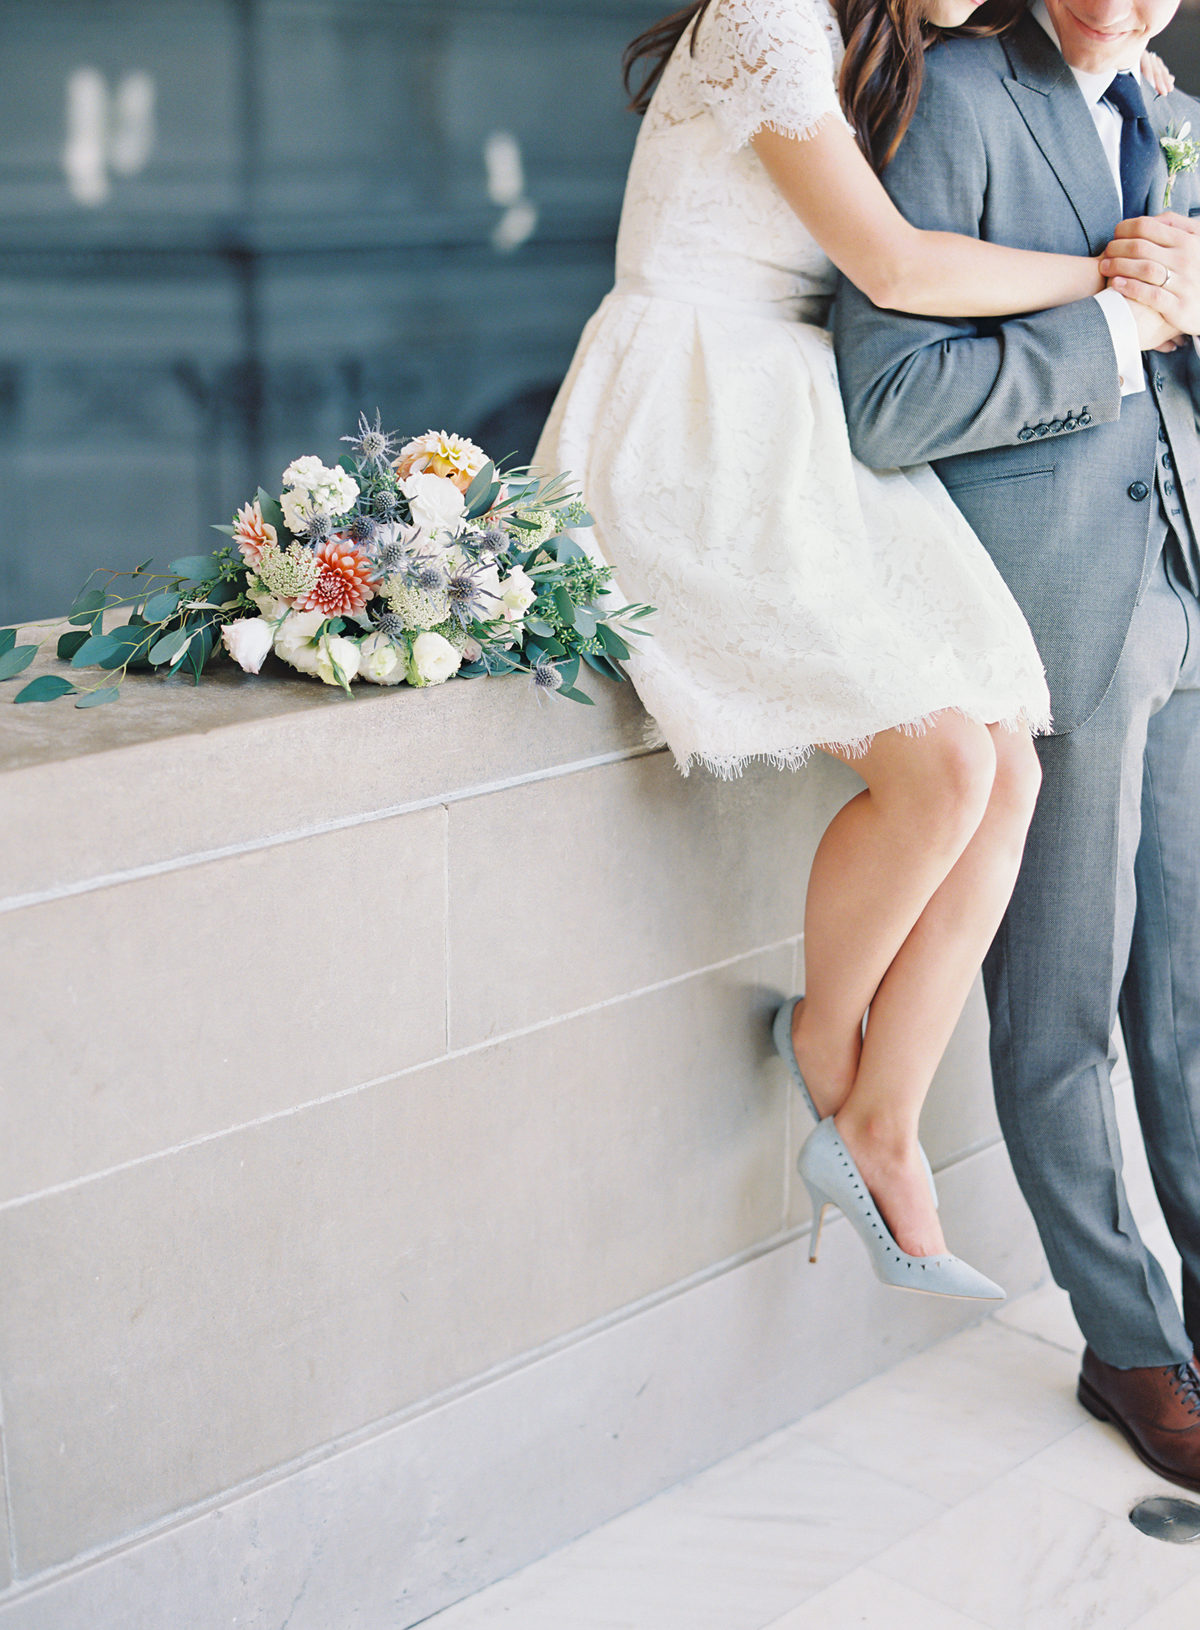 Lovely lace little white dress inspiration for the courthouse wedding. For her something blue, this bride wore dusty blue heels. // See more: 20 Stunning Civil Wedding Outfit Ideas to Make it Official In Style. // mysweetengagement.com